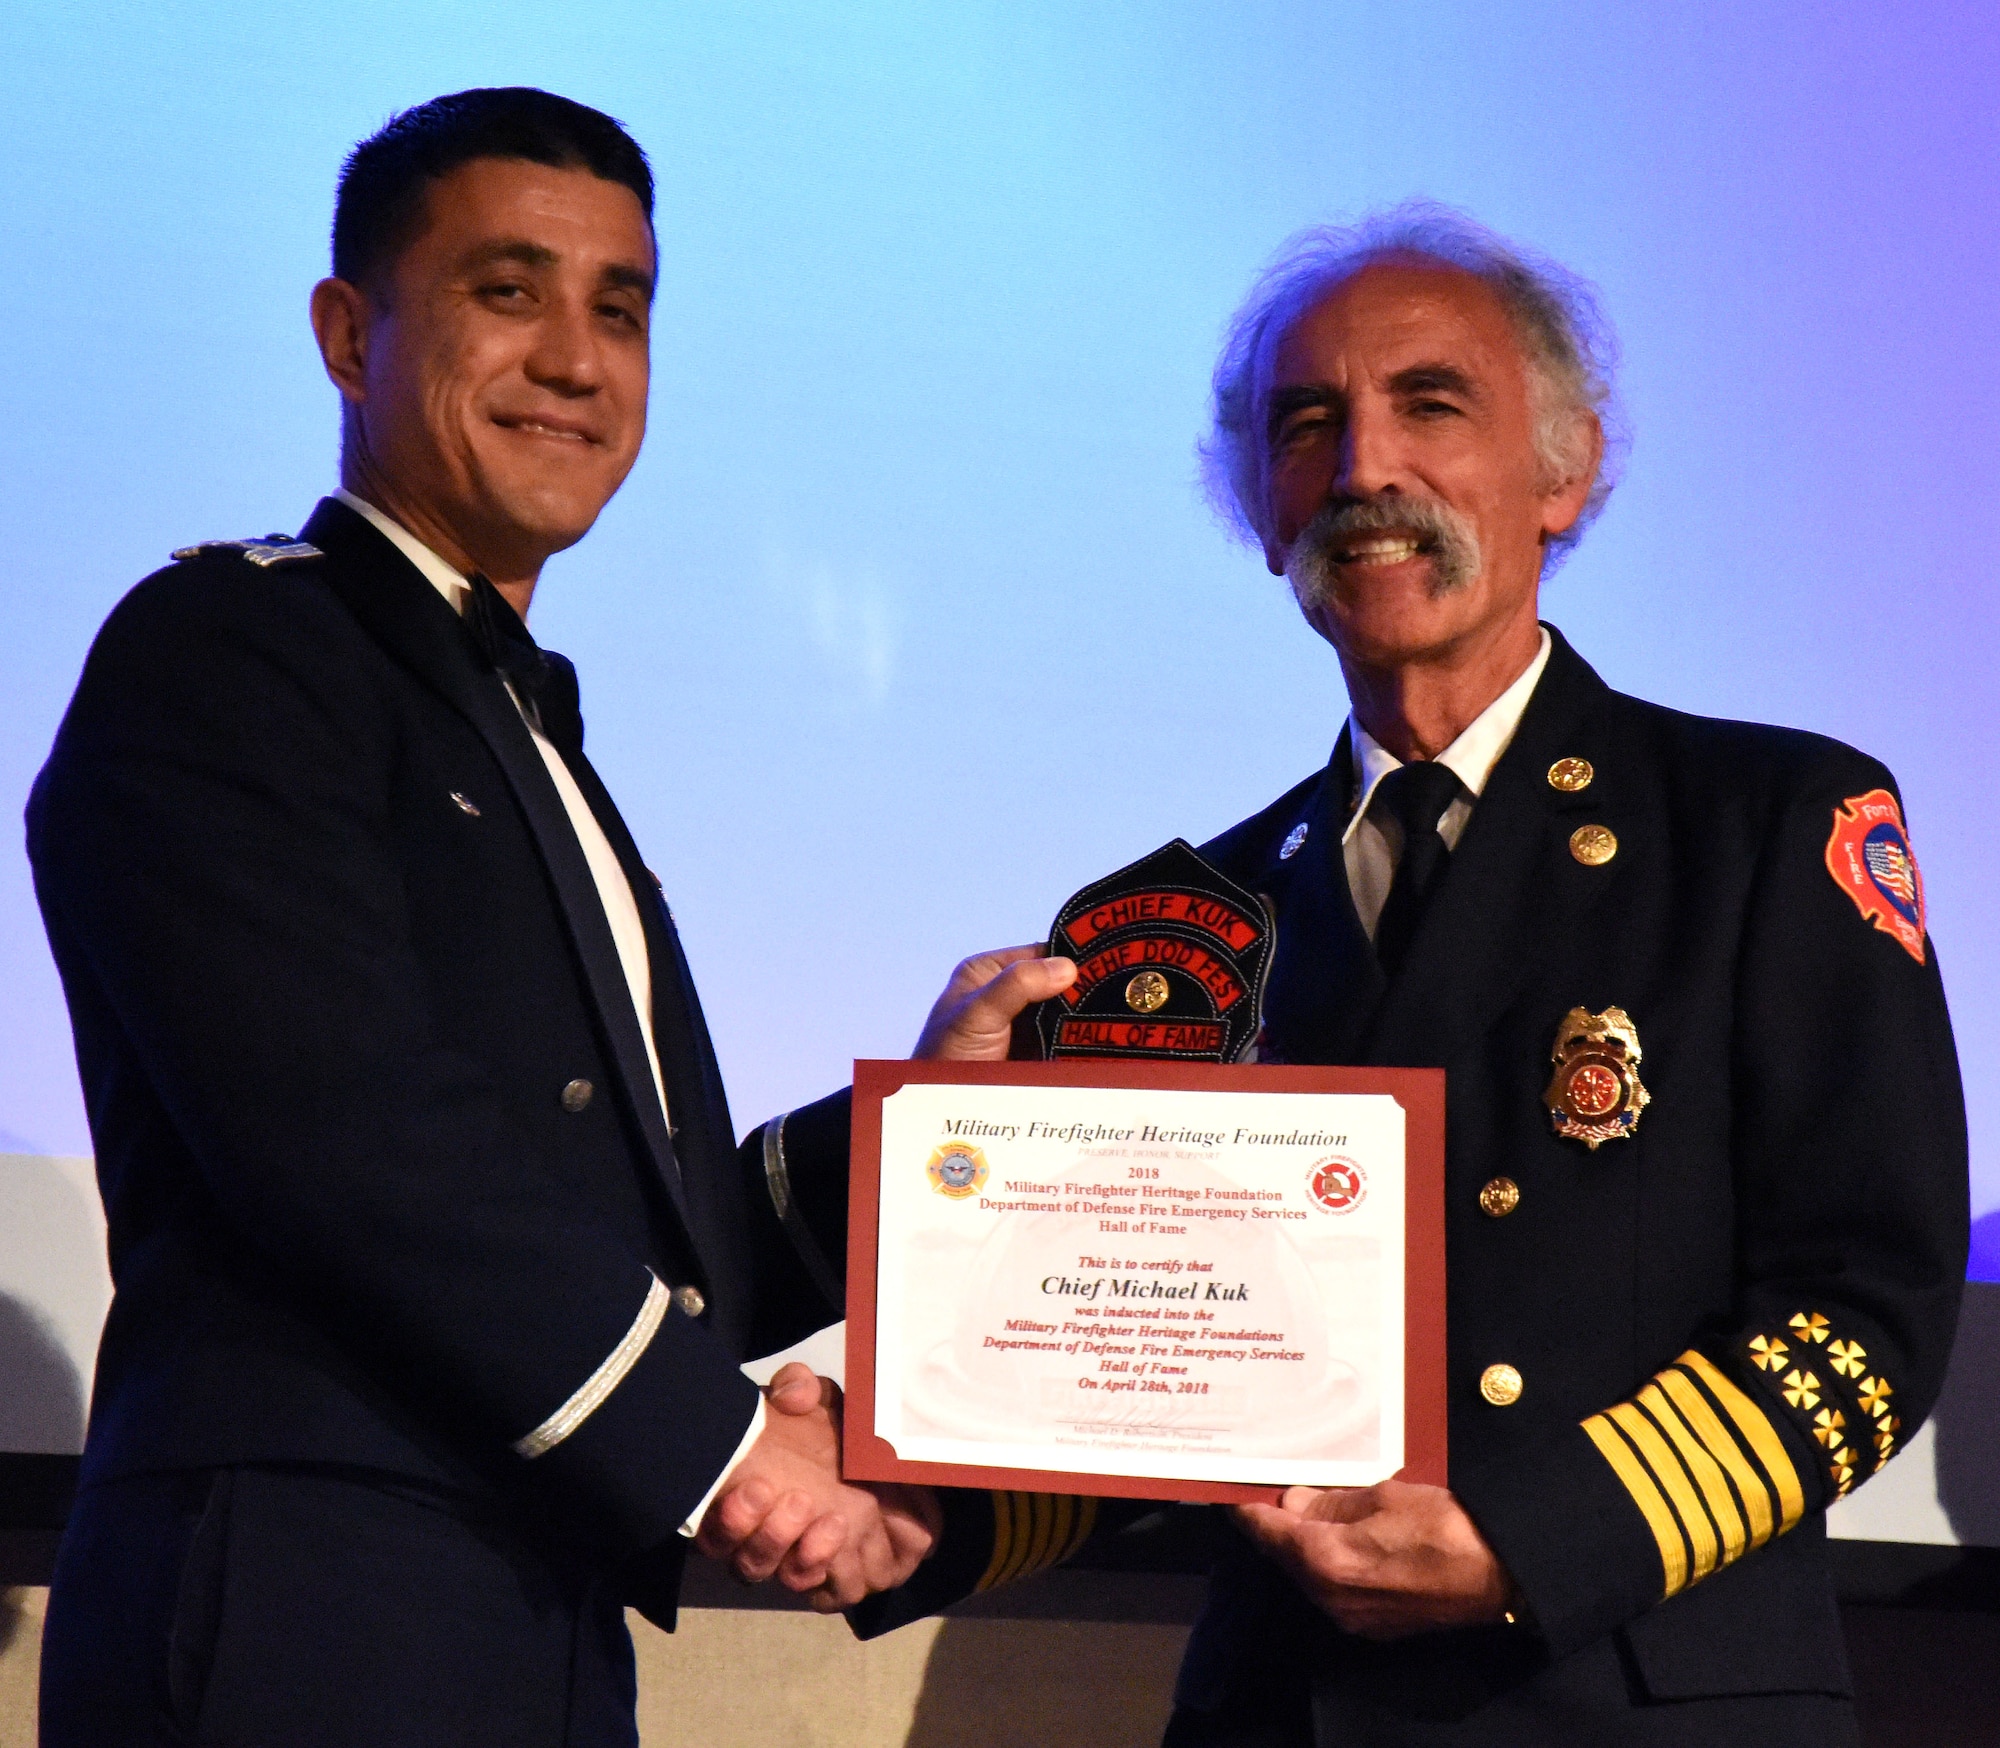 U.S. Air Force Col. Ricky Mills, 17th Training Wing commander, presents Chief Michael Kuk, firefighter Hall of Fame inductee, with a new clip for the front of his helmet as congratulations during the 16th Annual Firefighter Ball at the McNease Convention Center in San Angelo Texas, April 28, 2018. Kuk began his career as a firefighter in the U.S. Army from 1969-1975, he is now a military firefighting historian. (U.S. Air Force photo by Airman 1st Class Seraiah Hines/Released)